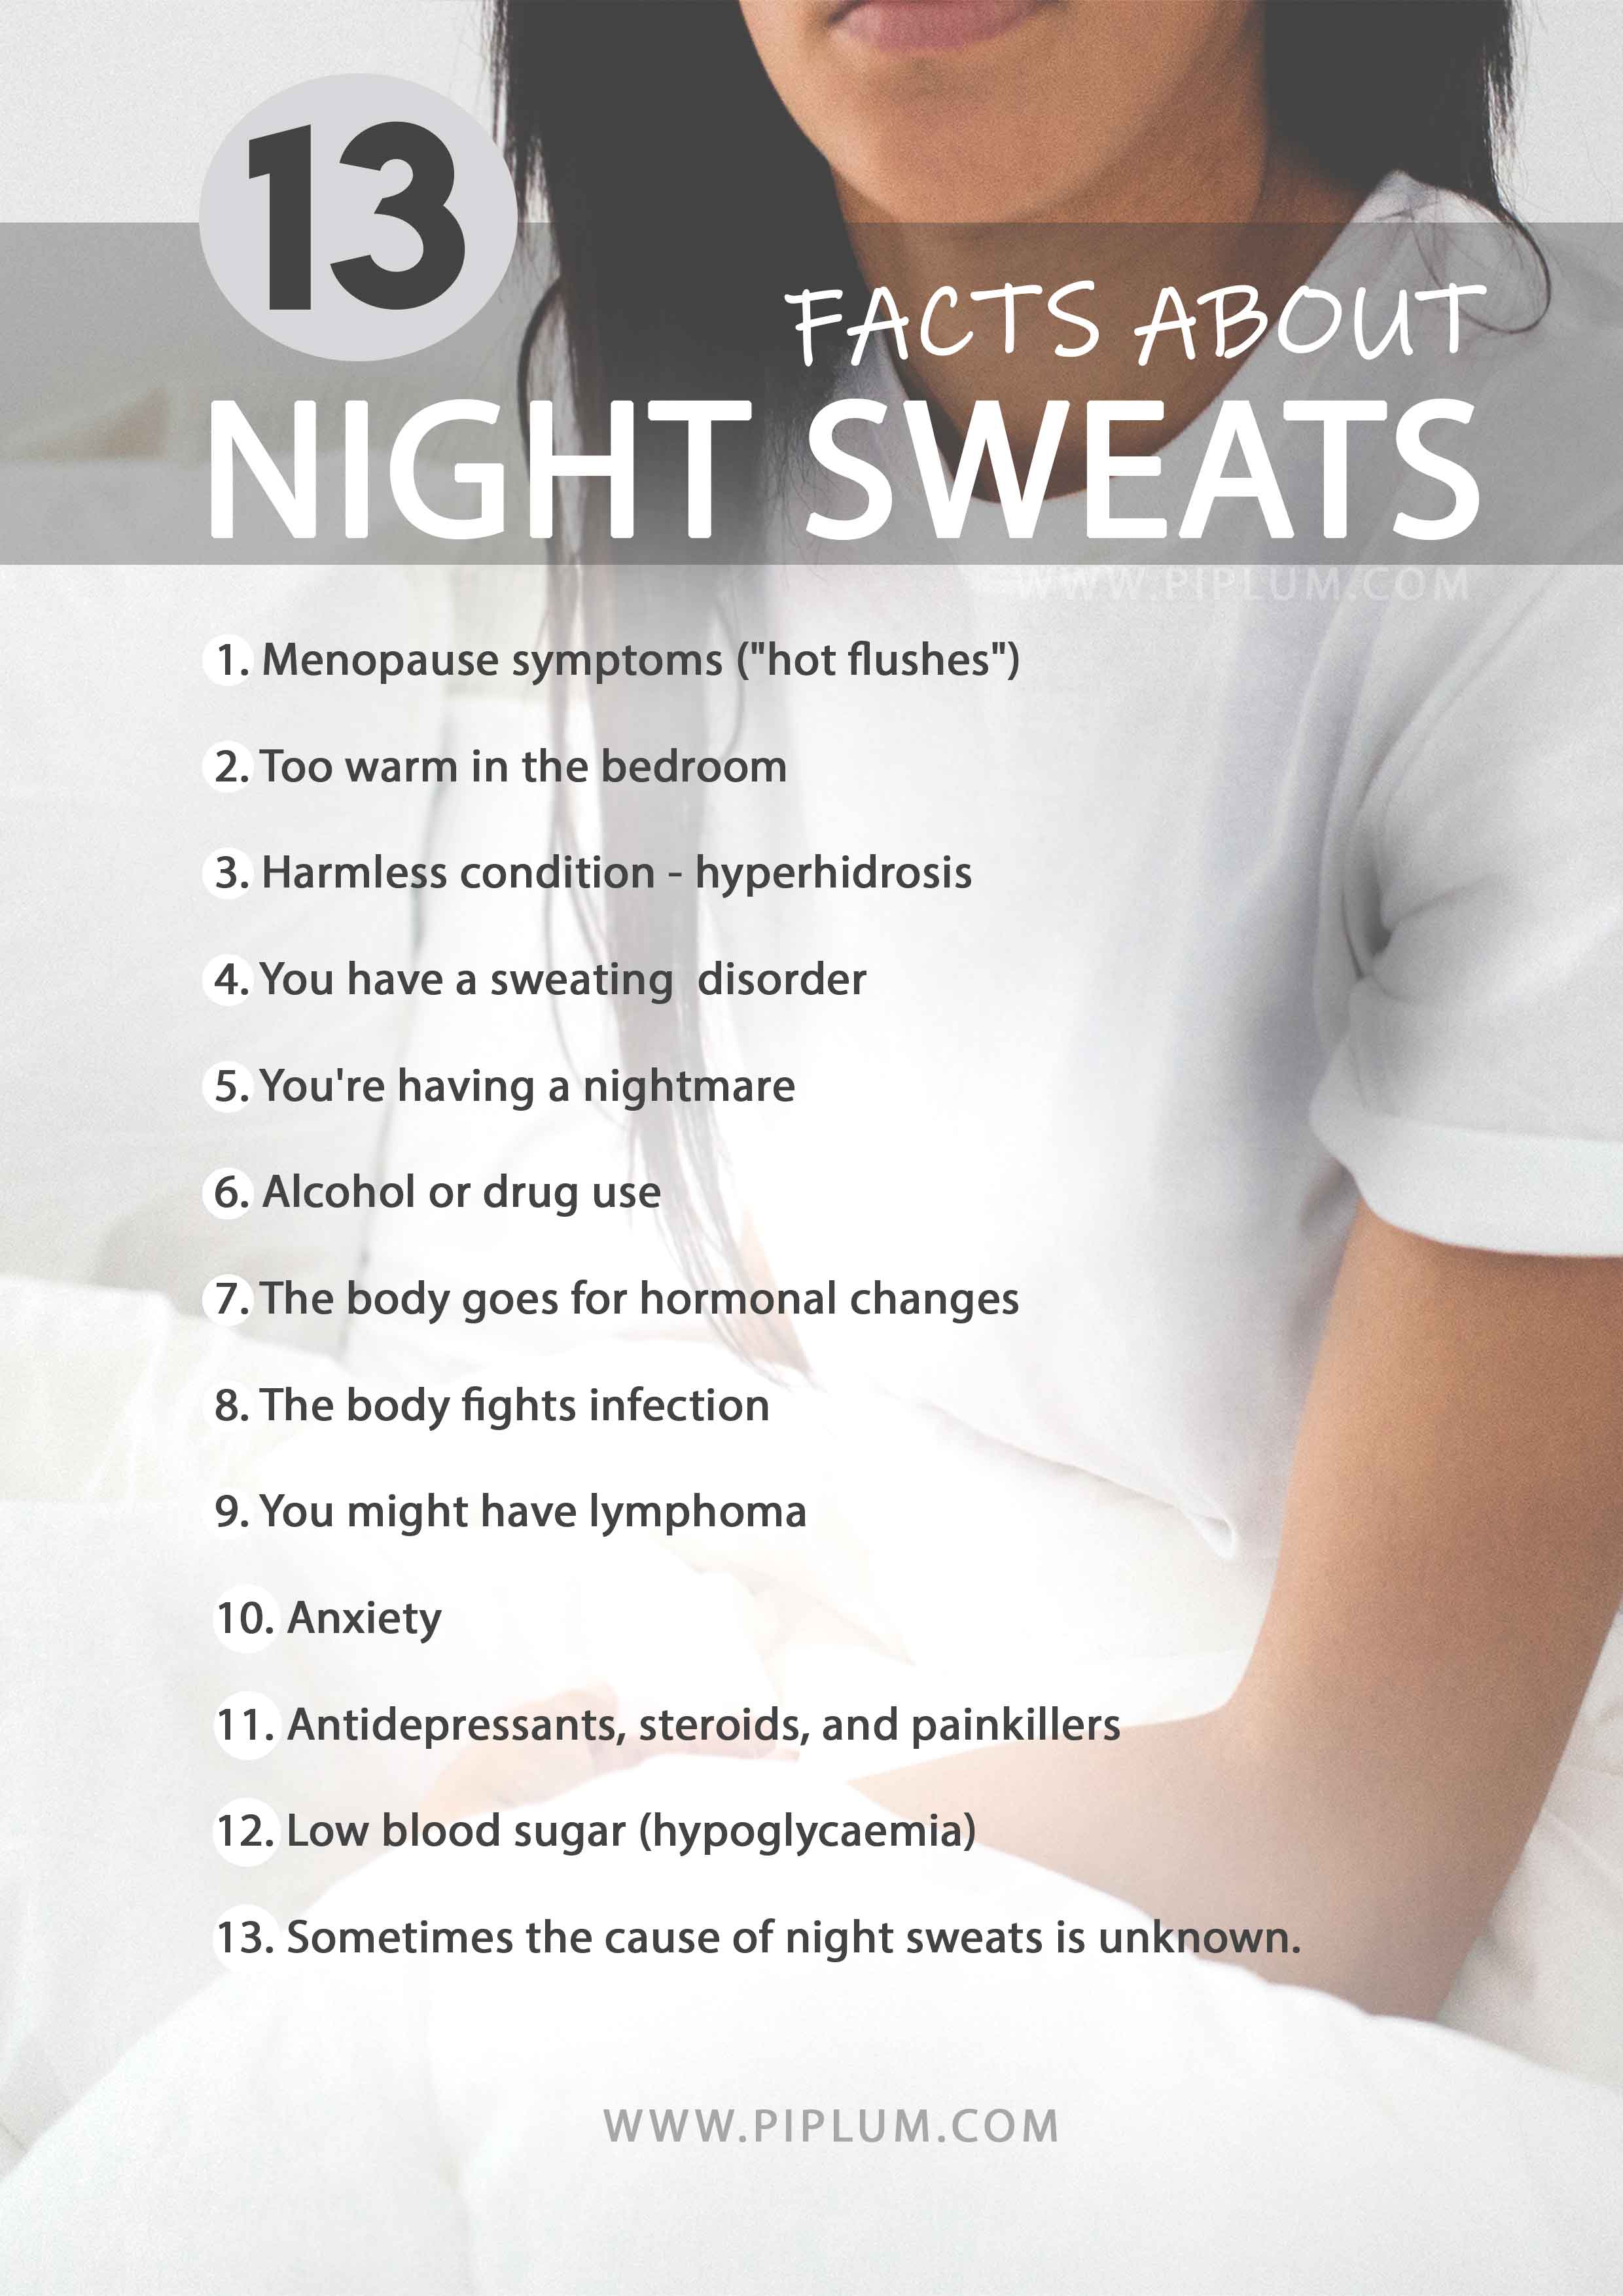  facts-about-night-sweats-why-sweating-how-to-reduce-sweating-for-women